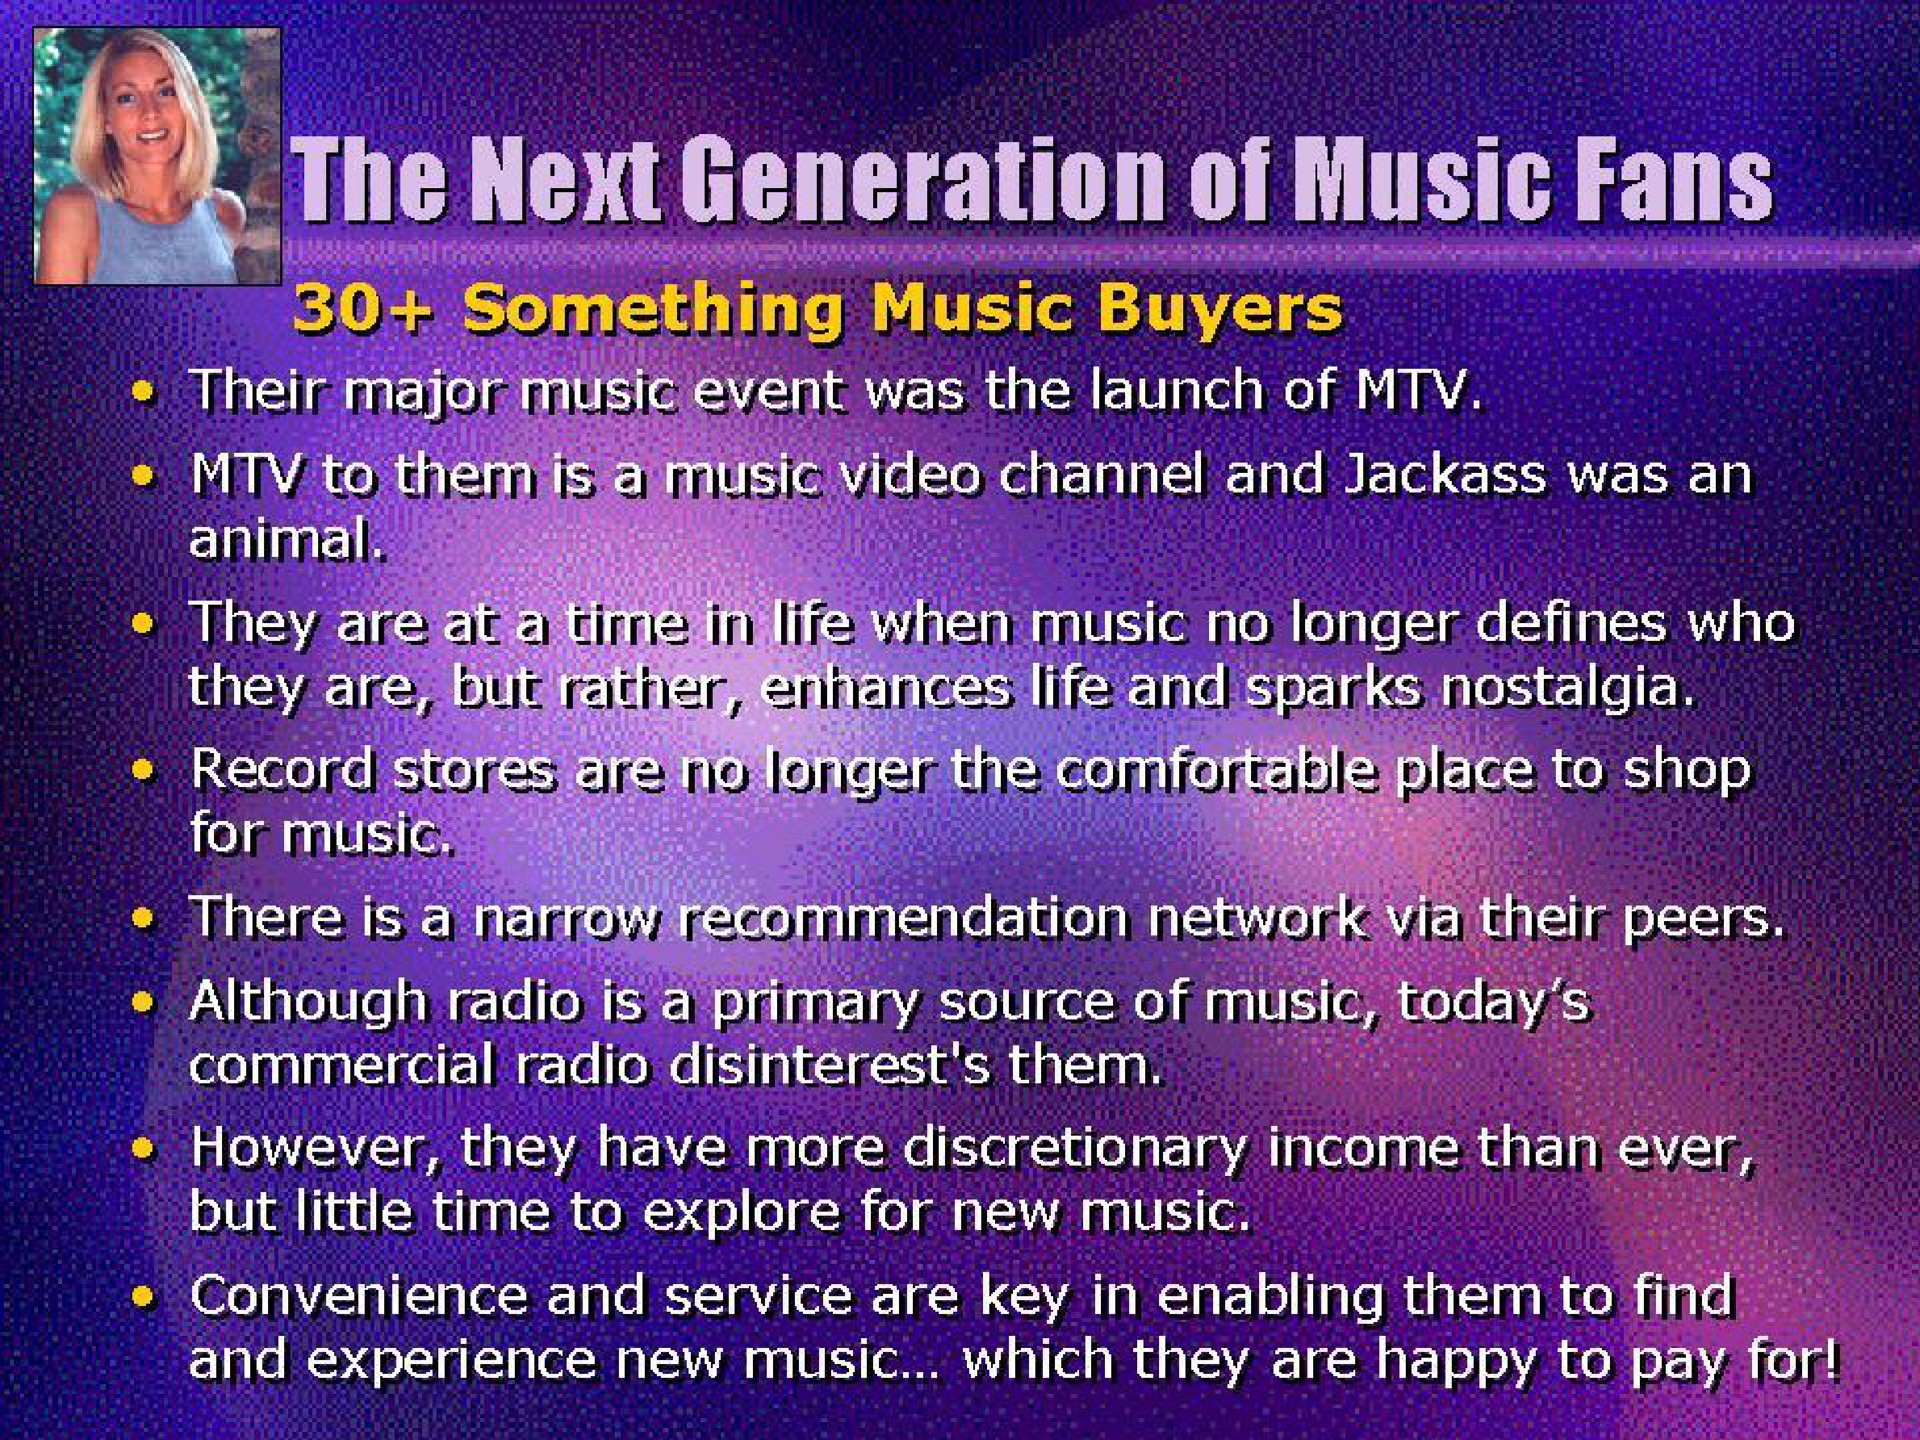 the generation music let ogee net mele mane ante form video channel and he longer defines who lace to shop a i is a prima however they have more discretionary income eas but little time to explore for new music convenience and service are key in enabling them to pore and experience new music which they are happy to hey | Universal Music Group